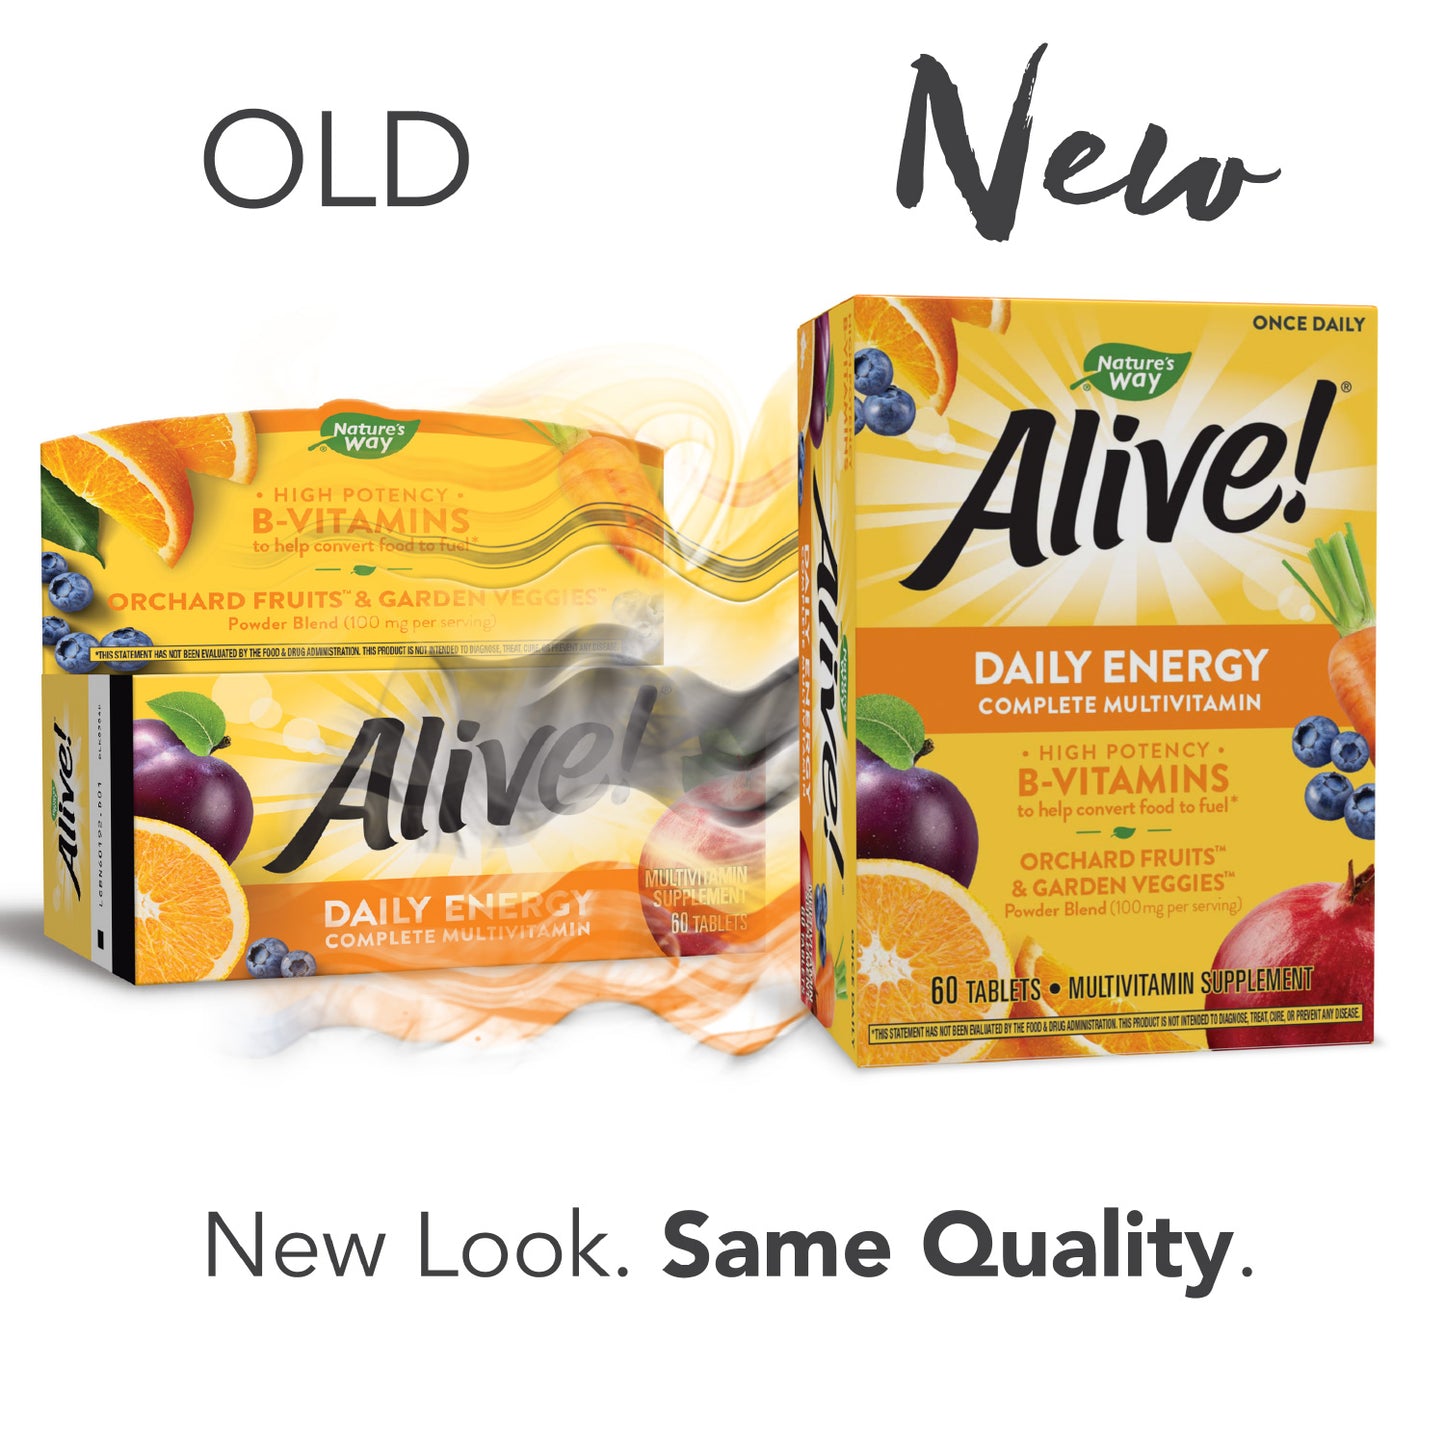 <{%MAIN5_60192%}>Nature's Way® | Alive!® Daily Energy Complete Multivitamin